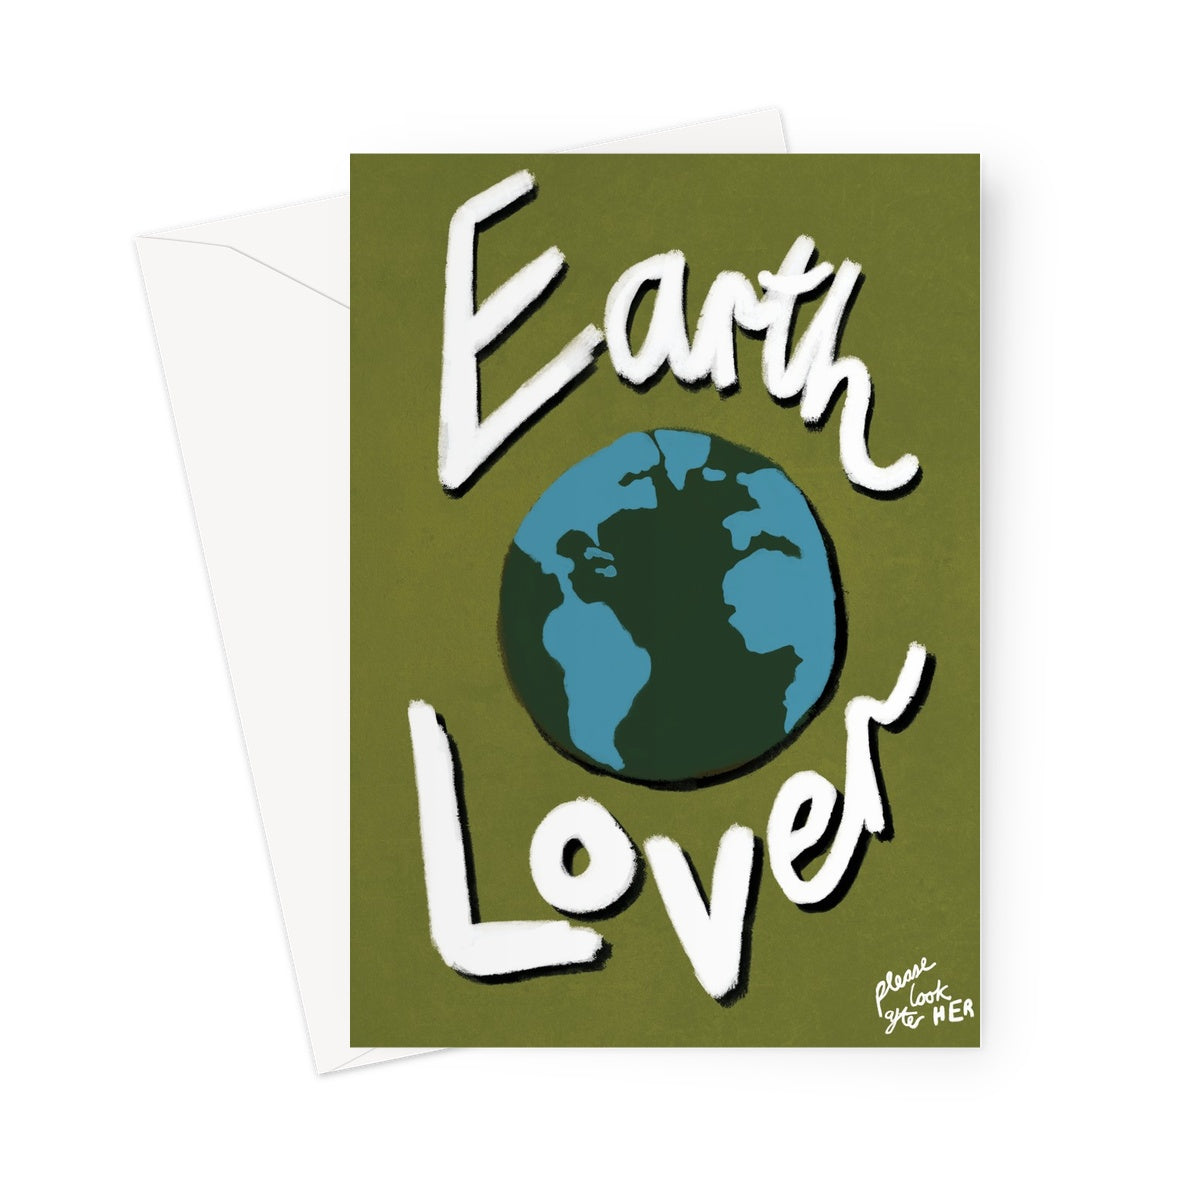 Earth Lover Print - Olive Green, Blue, White Greeting Card